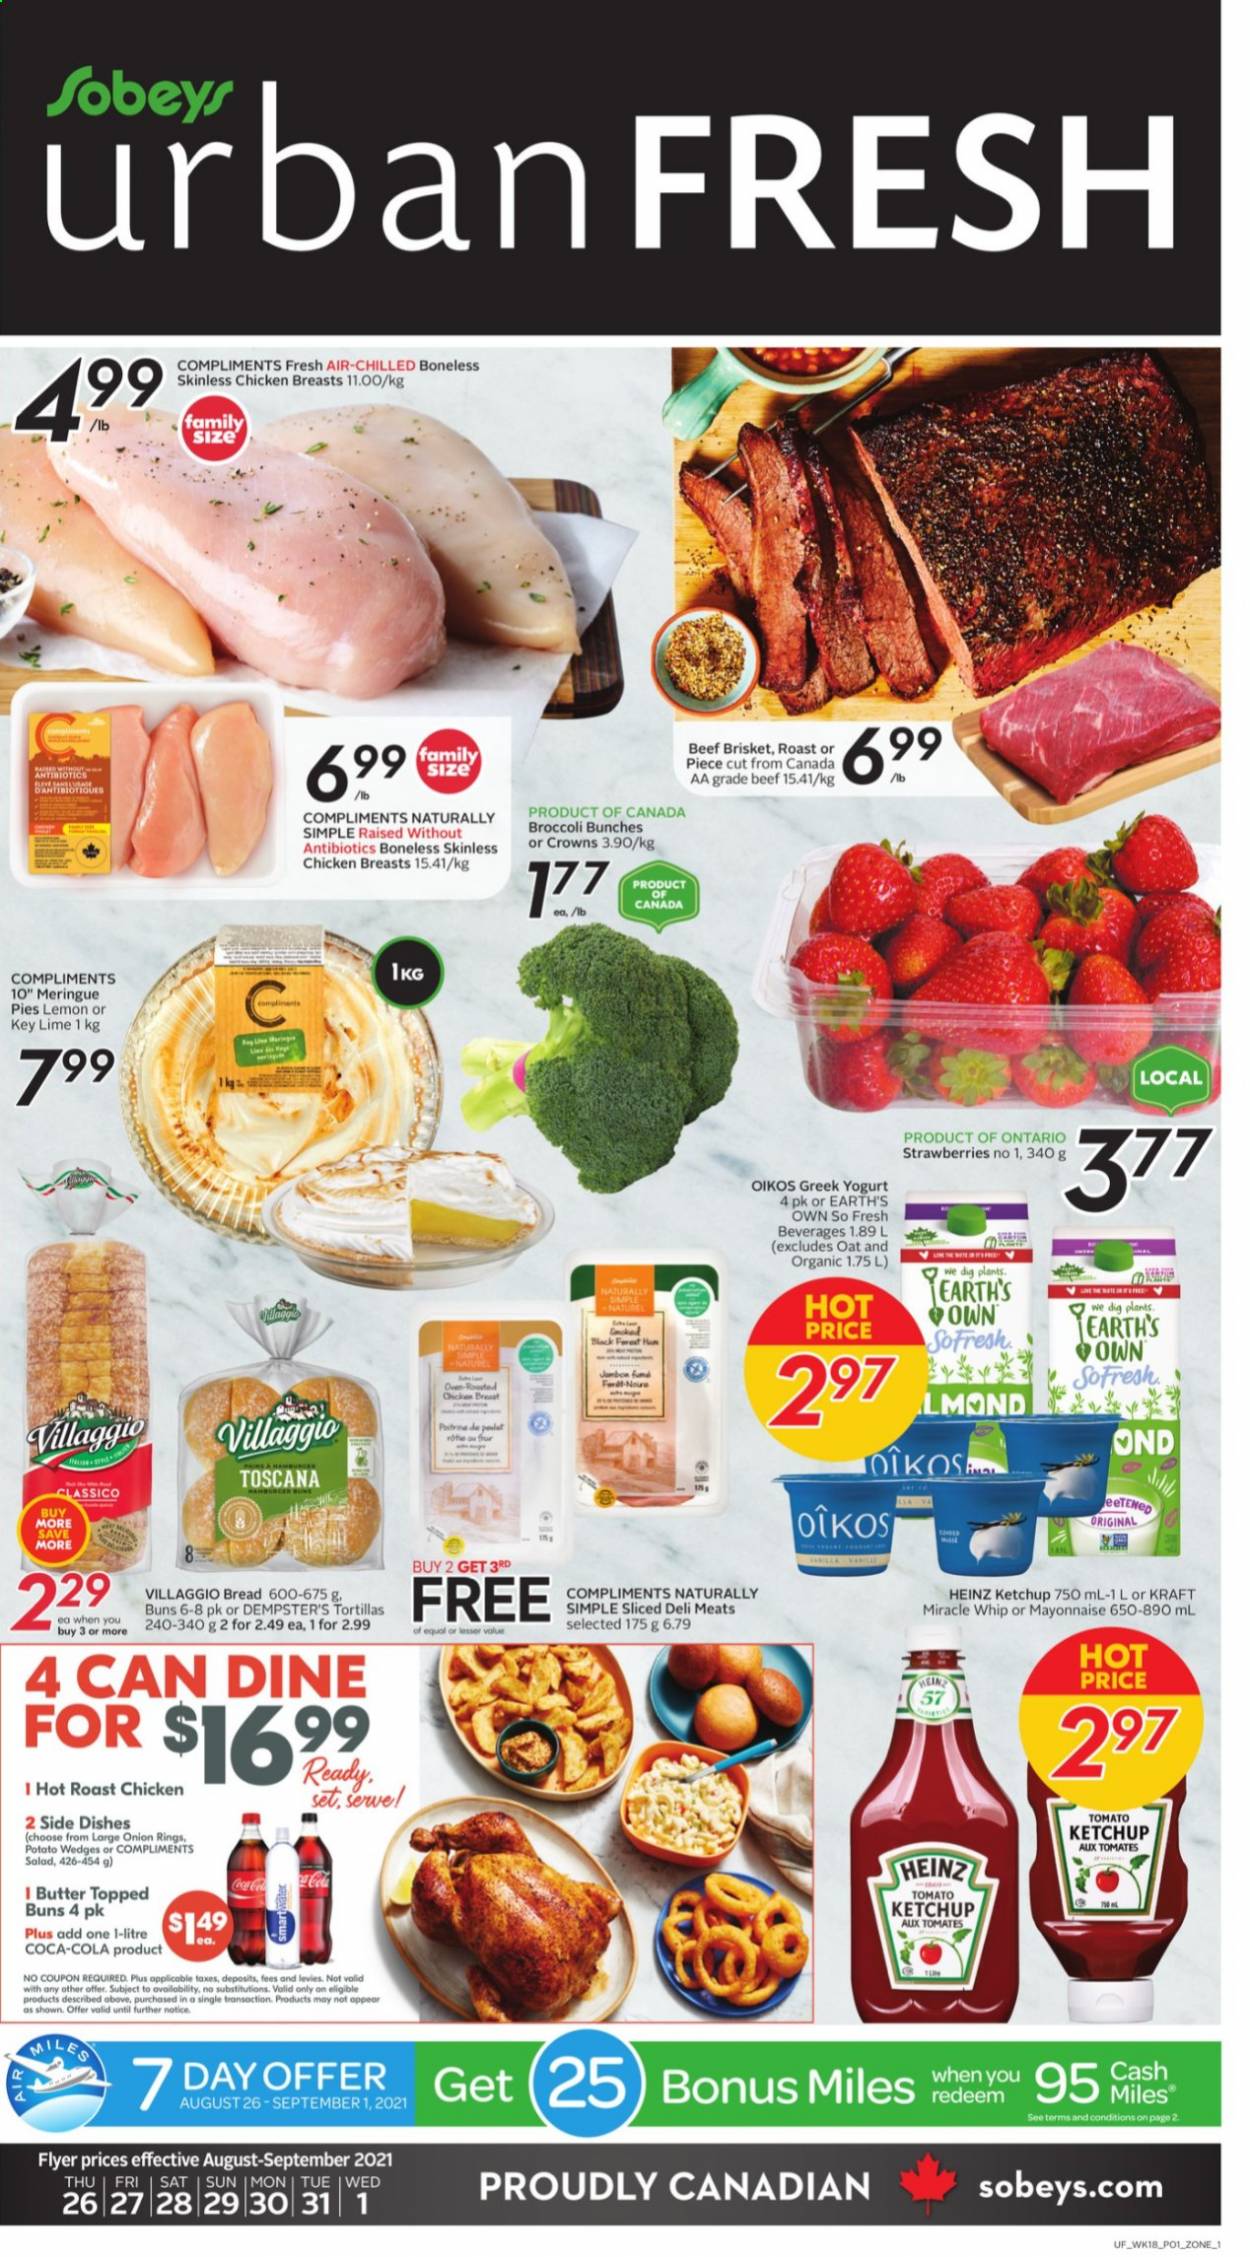 thumbnail - Sobeys Urban Fresh Flyer - August 26, 2021 - September 01, 2021 - Sales products - bread, tortillas, buns, broccoli, strawberries, chicken roast, onion rings, Kraft®, greek yoghurt, yoghurt, Oikos, butter, mayonnaise, Miracle Whip, potato wedges, oats, Heinz, Classico, Coca-Cola, chicken breasts, chicken, beef meat, beef brisket. Page 1.